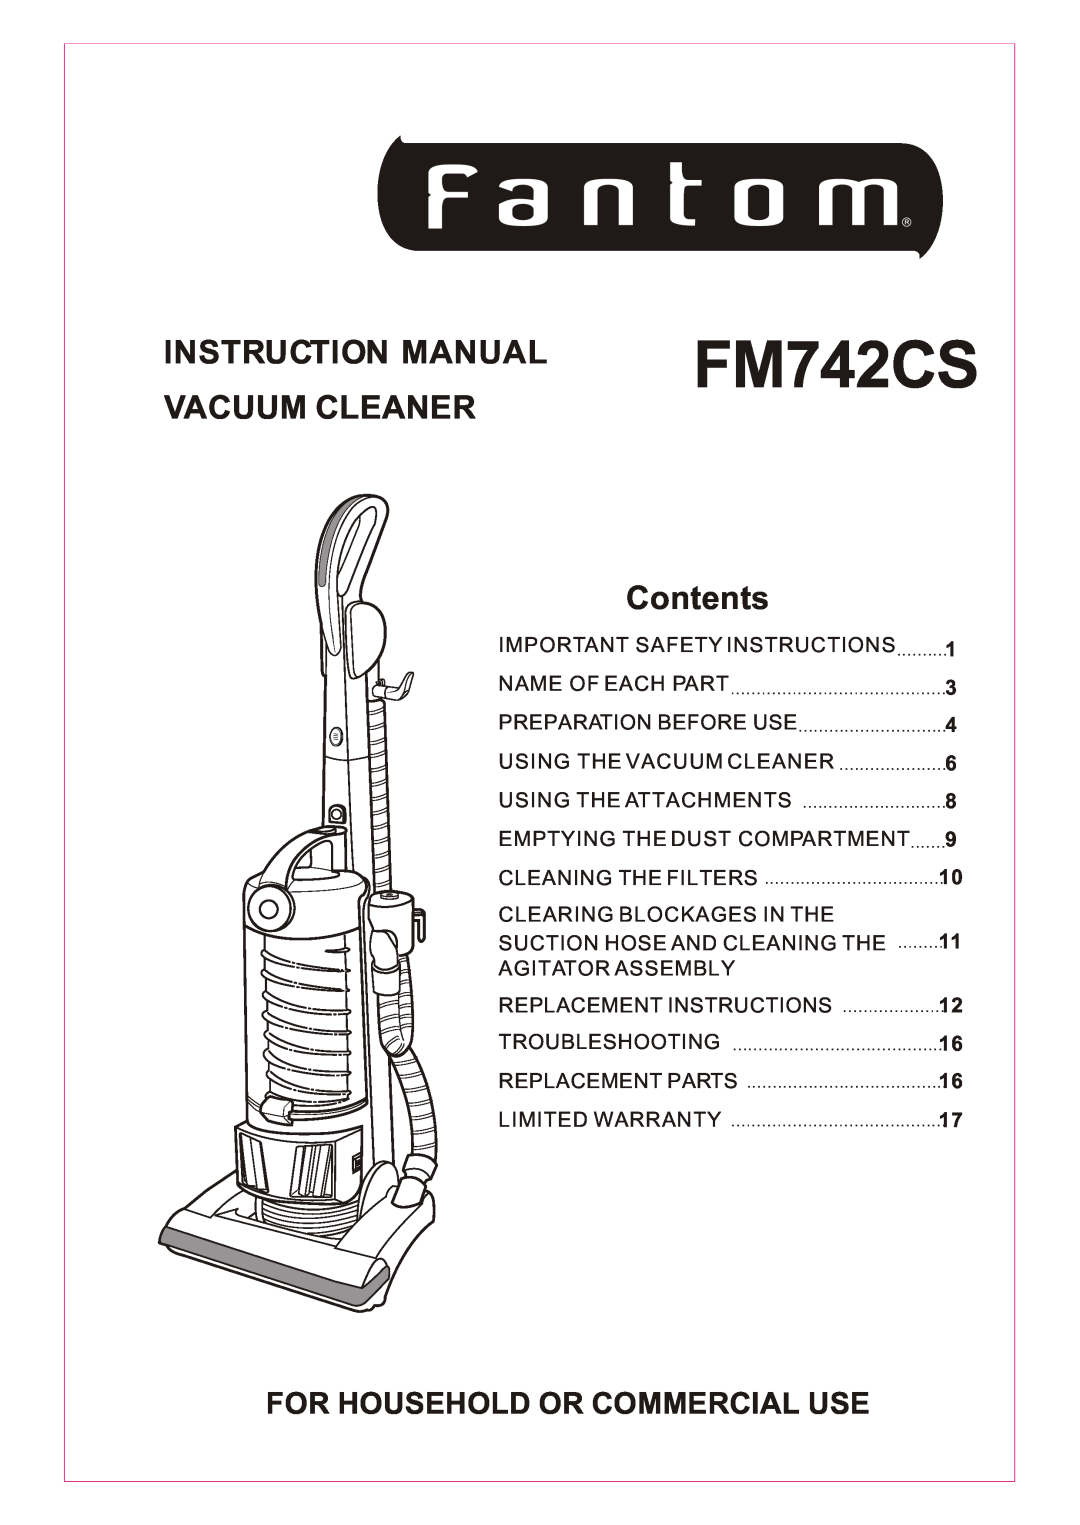 Fantom Vacuum FM742CS instruction manual VACUUM CLEANER Contents, For Household Or Commercial Use 